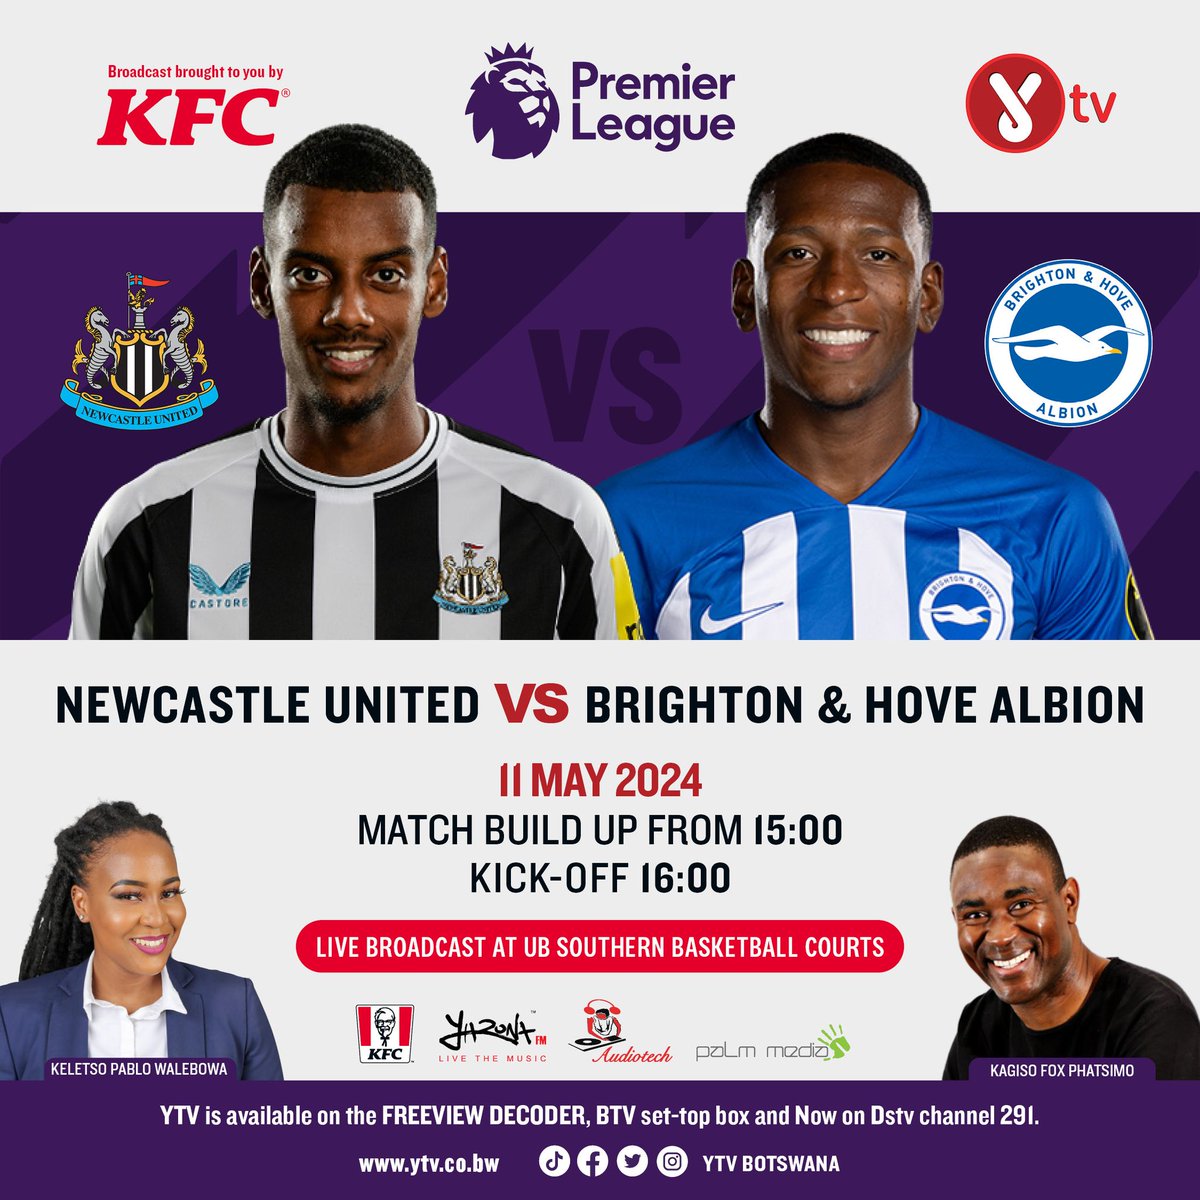 Join us as we bring you the showdown between Newcastle United and Brighton & Hove Albion. 📷 Tune in for the match build-up starting at 3pm, followed by the kick-off at 4pm. Don't miss a moment of the action! 

#eplbroadcastonytv
#ytvbotswana
#ytvwhereentertainmentlives